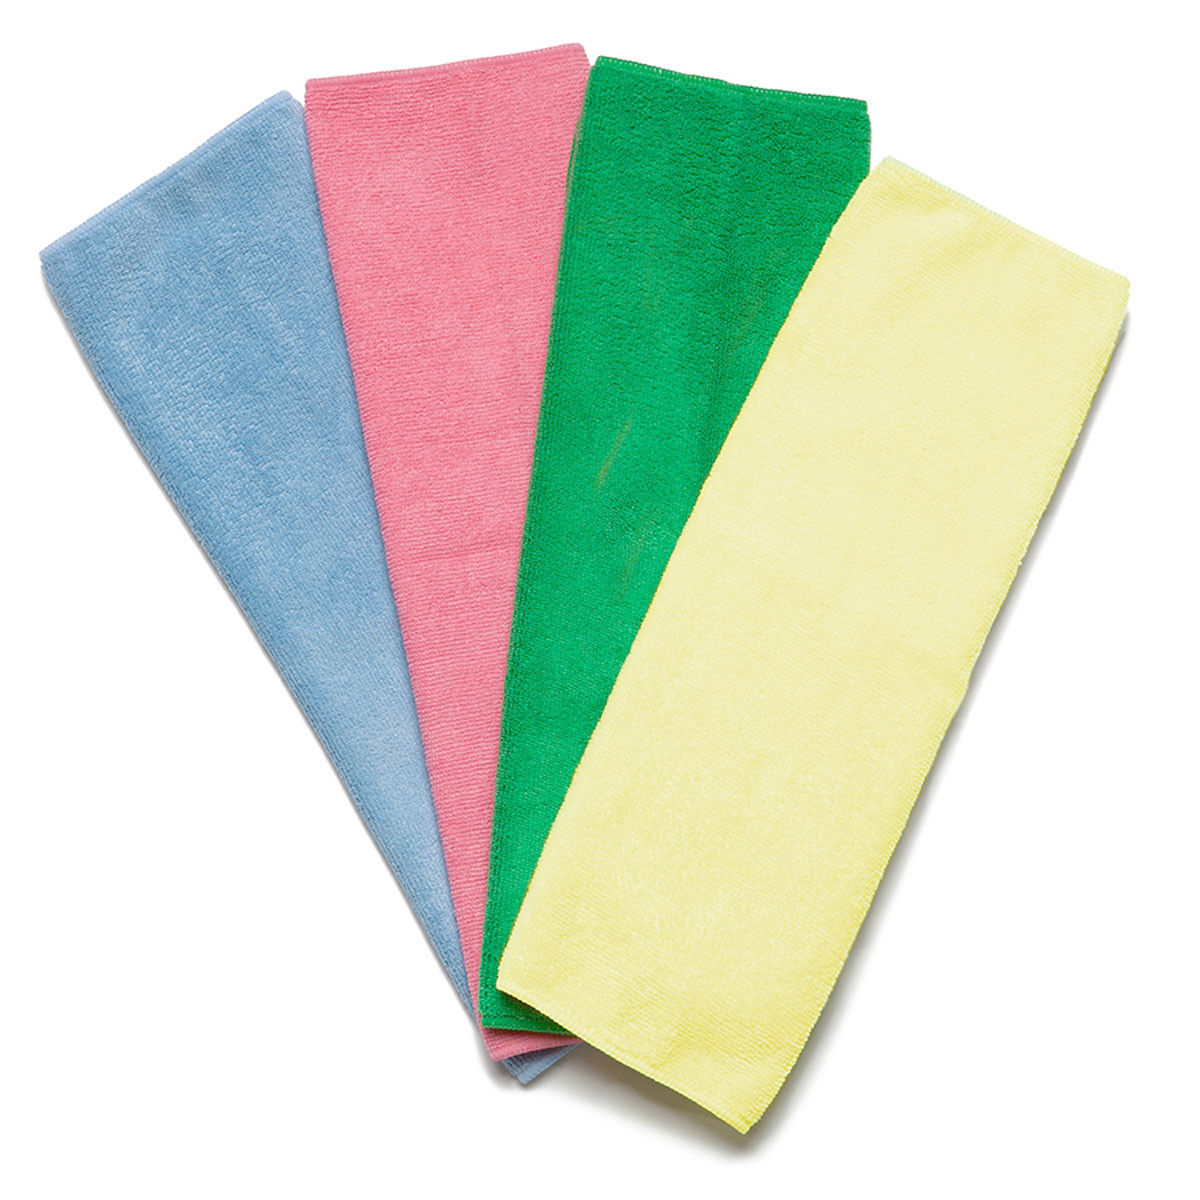 Microfiber 16 x 16 Cleaning Towels, 250 gsm Questions & Answers